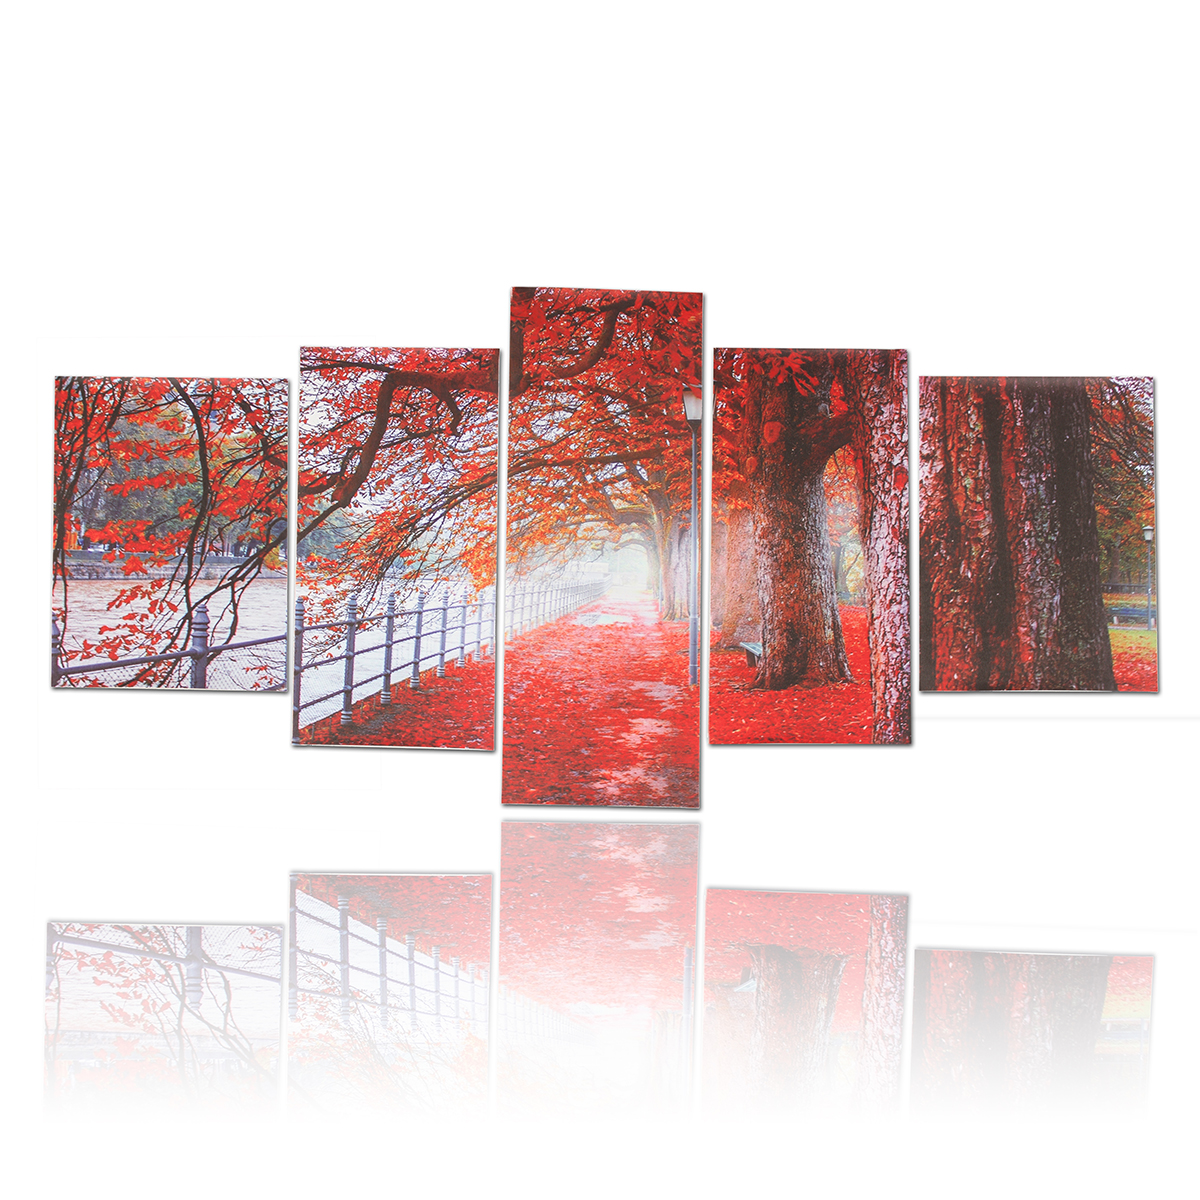 5Pcs-Red-Falling-Leaves-Canvas-Painting-Autumn-Tree-Wall-Decorative-Print-Art-Pictures-Unframed-Wall-1809936-5